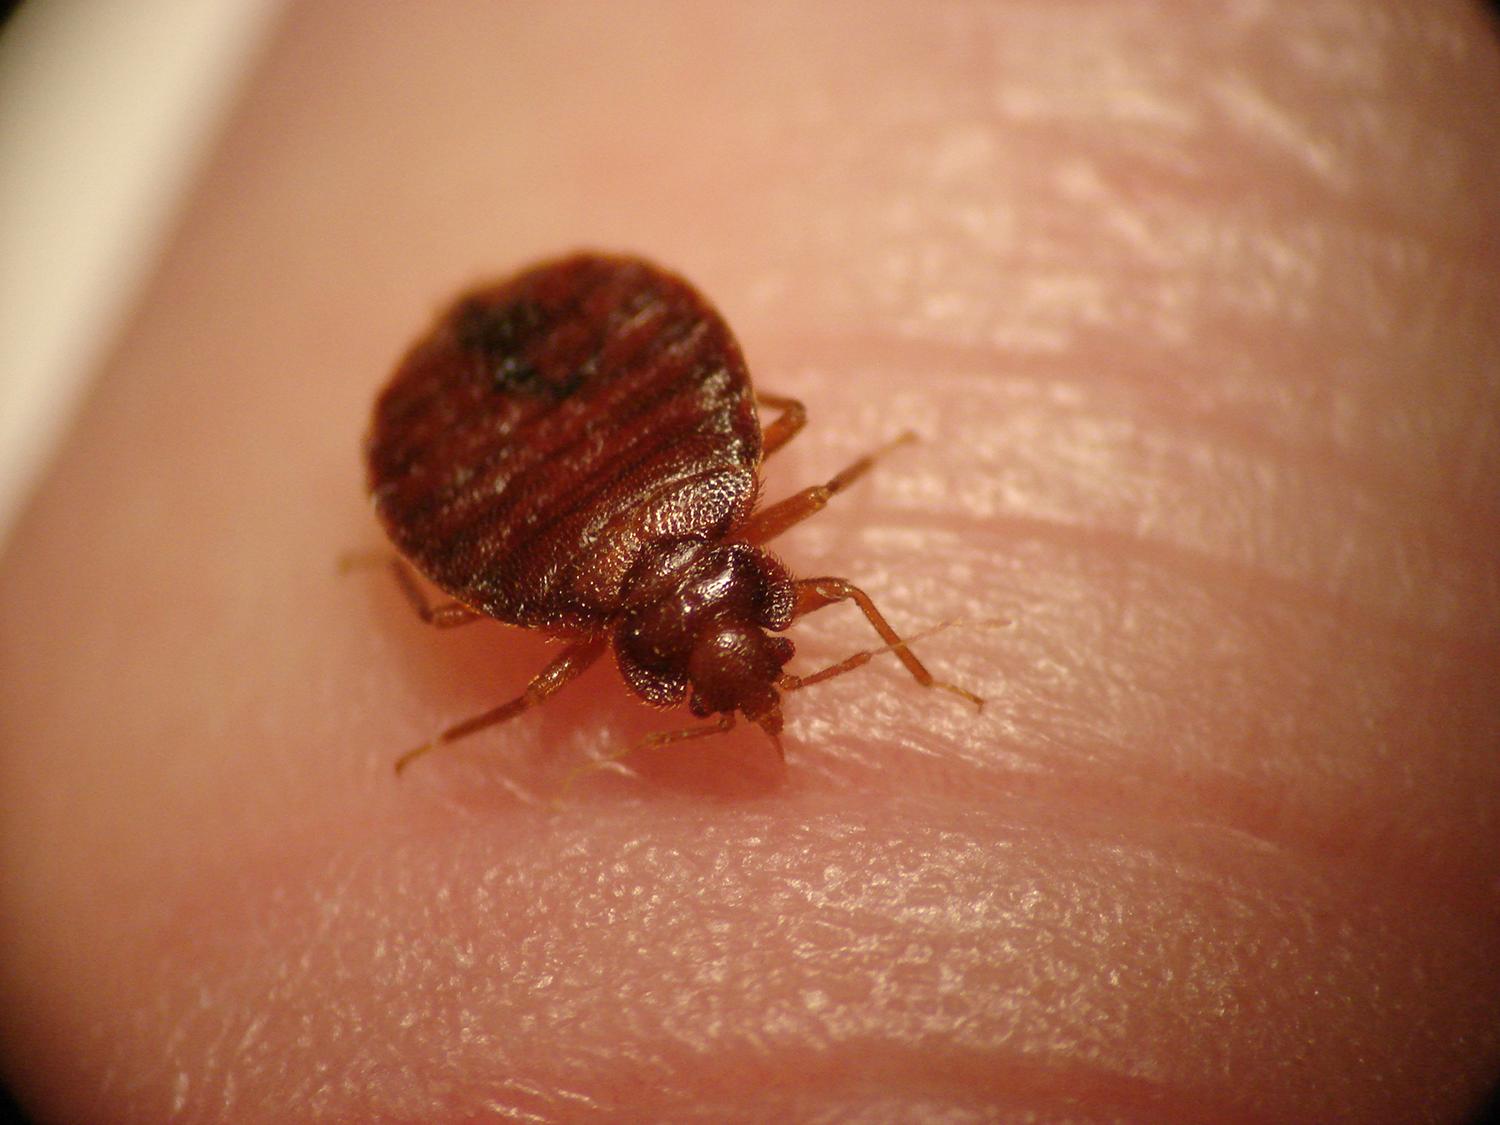 can new mattresses have bed bugs